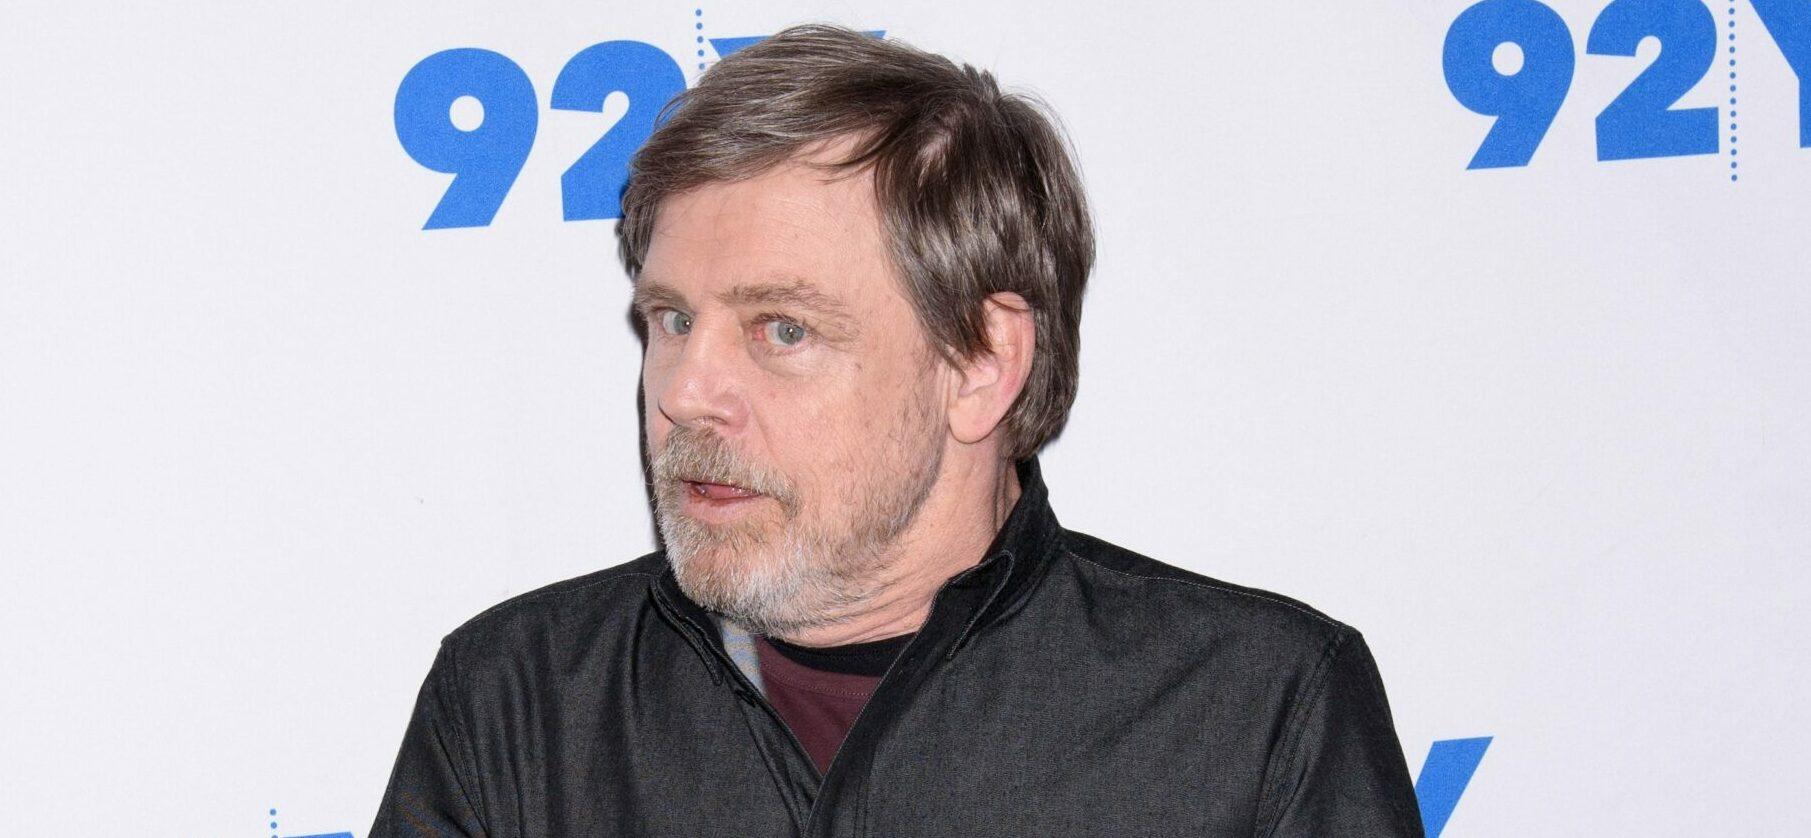 Mark Hamill in Conversation with Frank Oz at 92Y